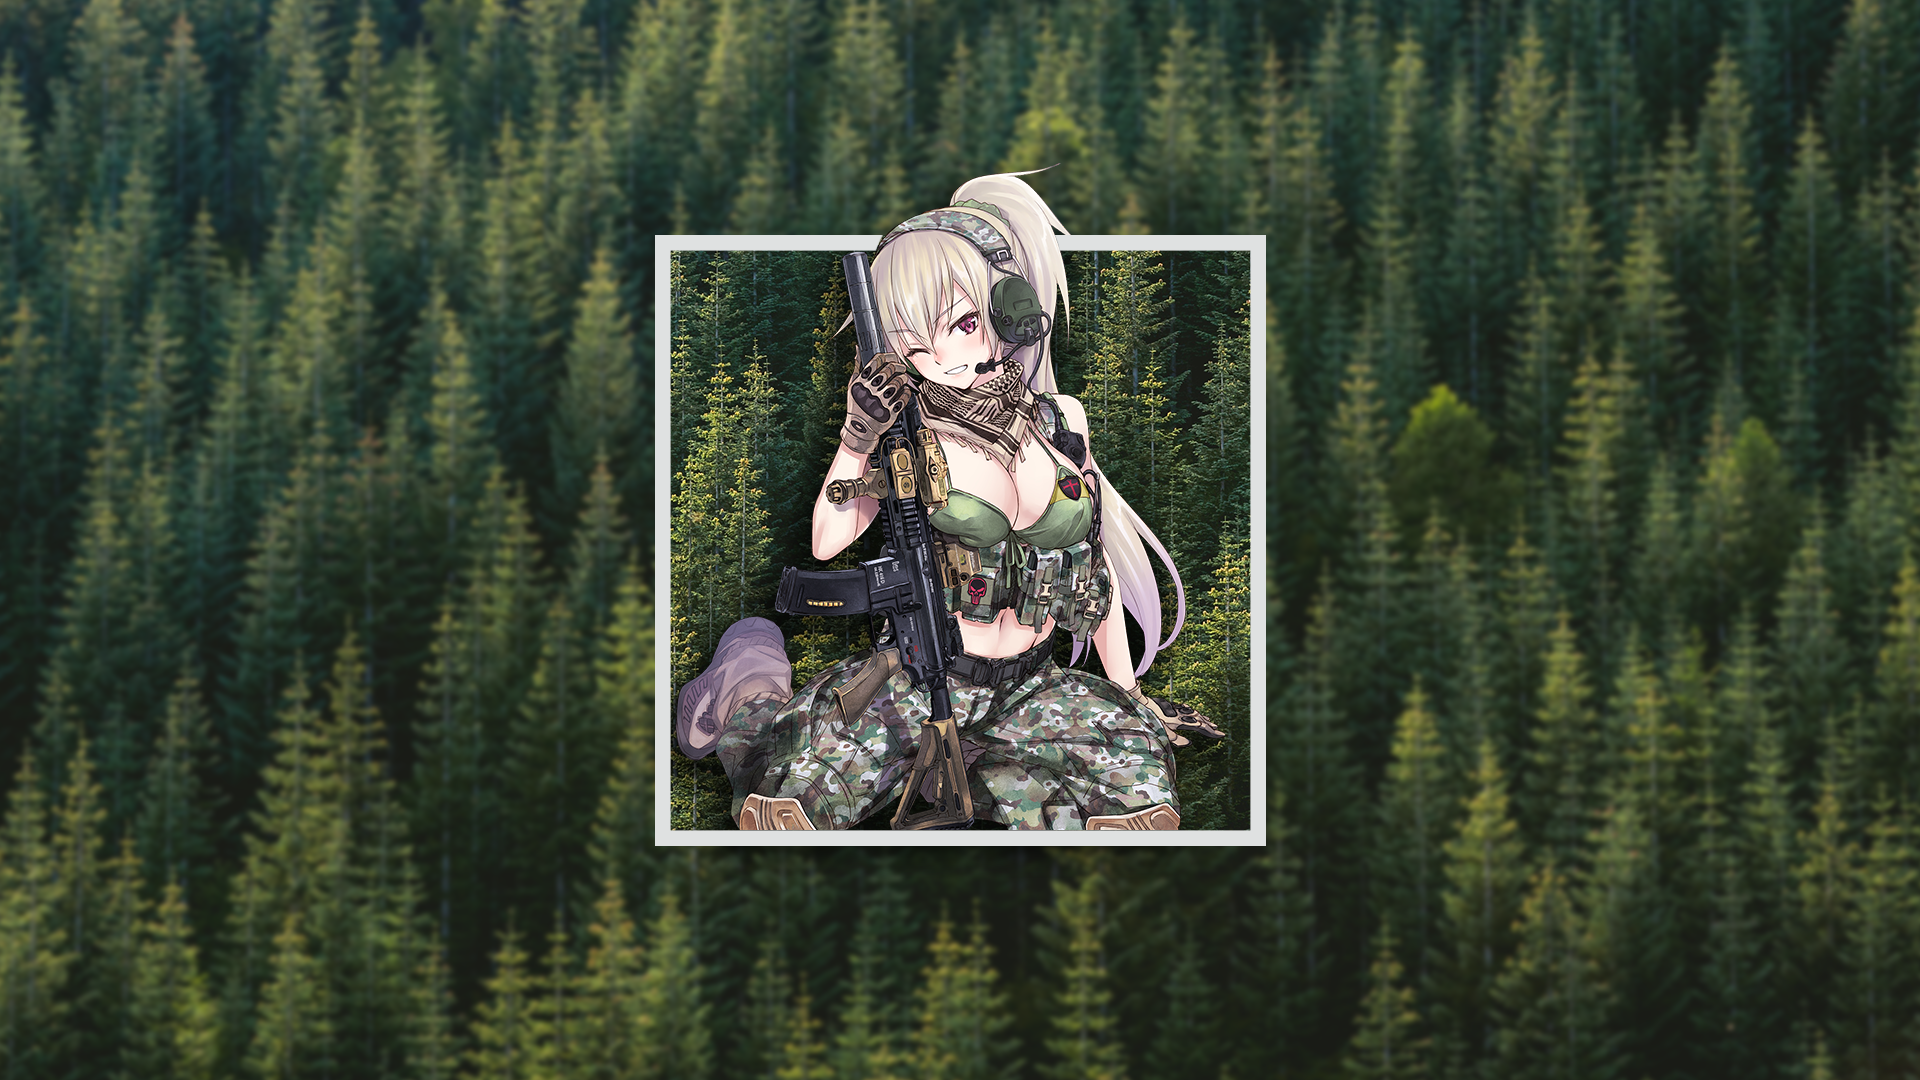 Anime 1920x1080 anime picture-in-picture trees anime girls headphones one eye closed boobs machine gun weapon red eyes camouflage cleavage girls with guns